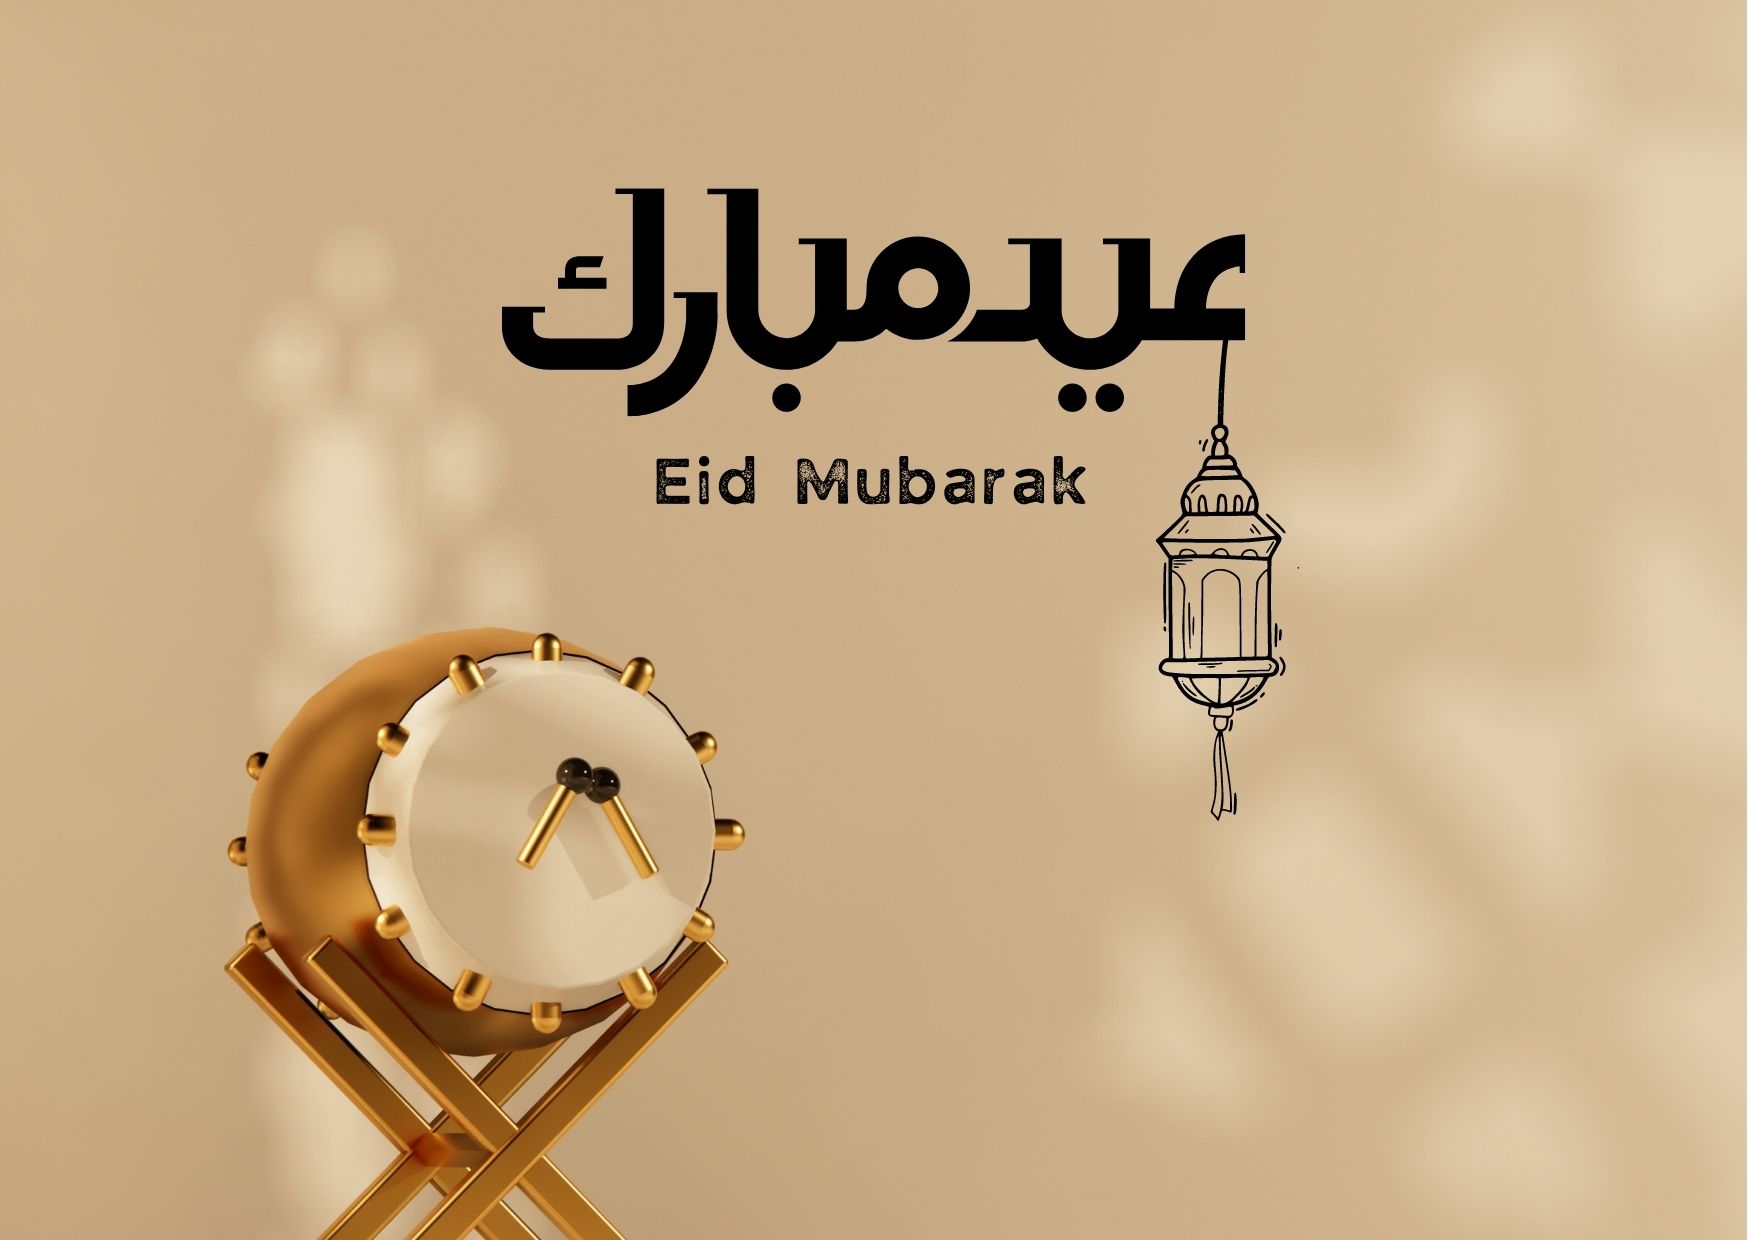 eid greeting card vector art, icons, and graphics for free download (32)